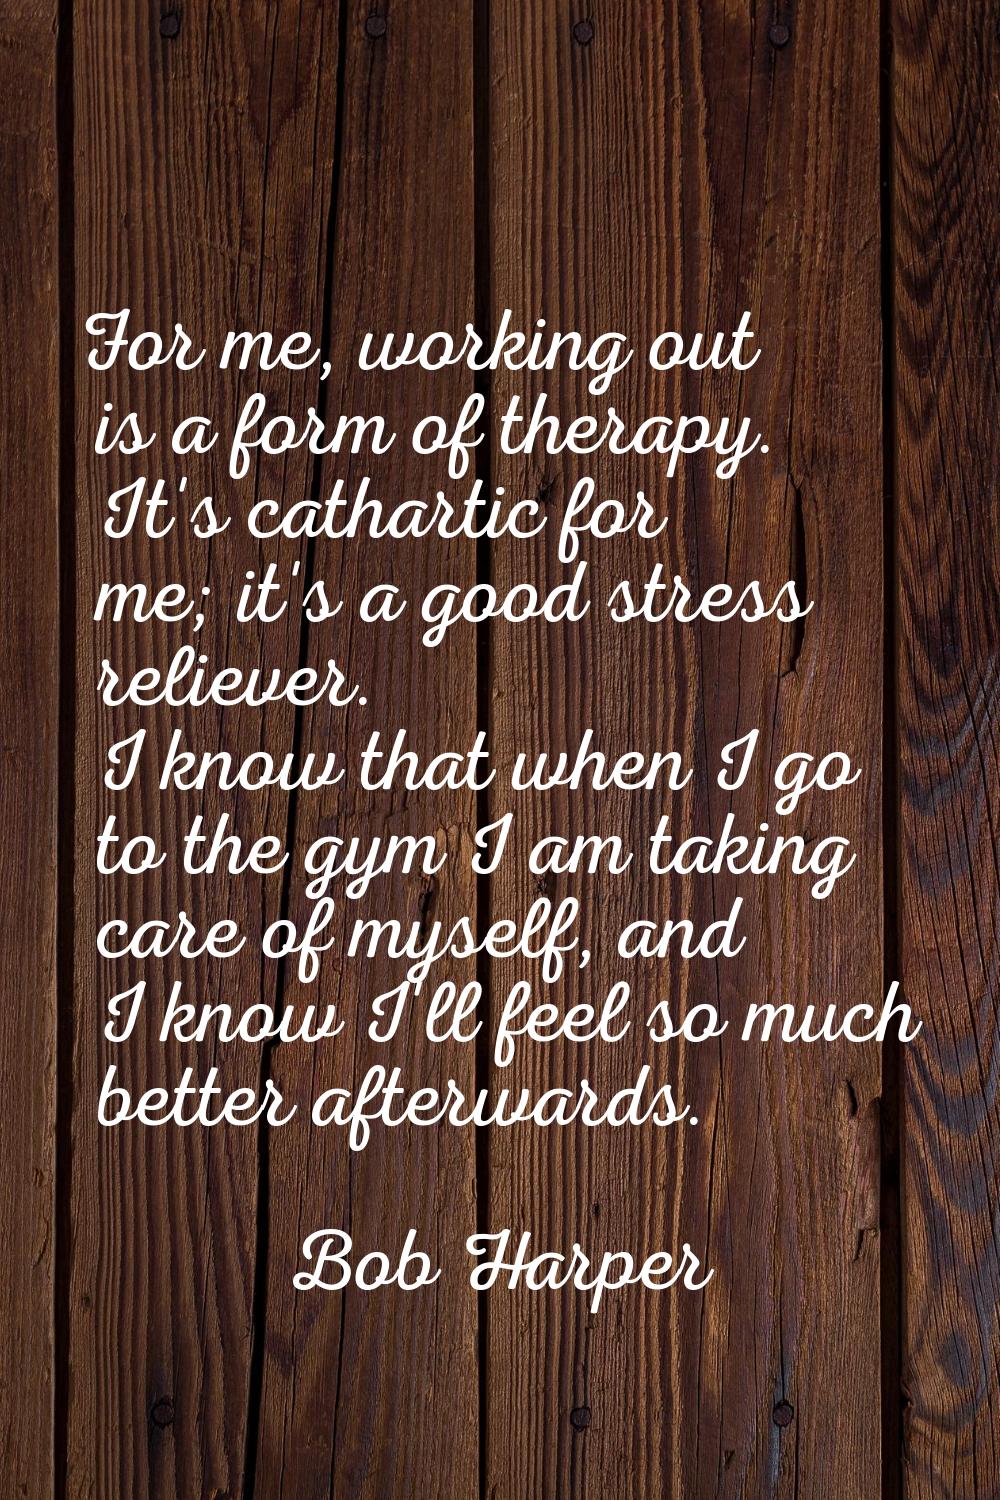 For me, working out is a form of therapy. It's cathartic for me; it's a good stress reliever. I kno